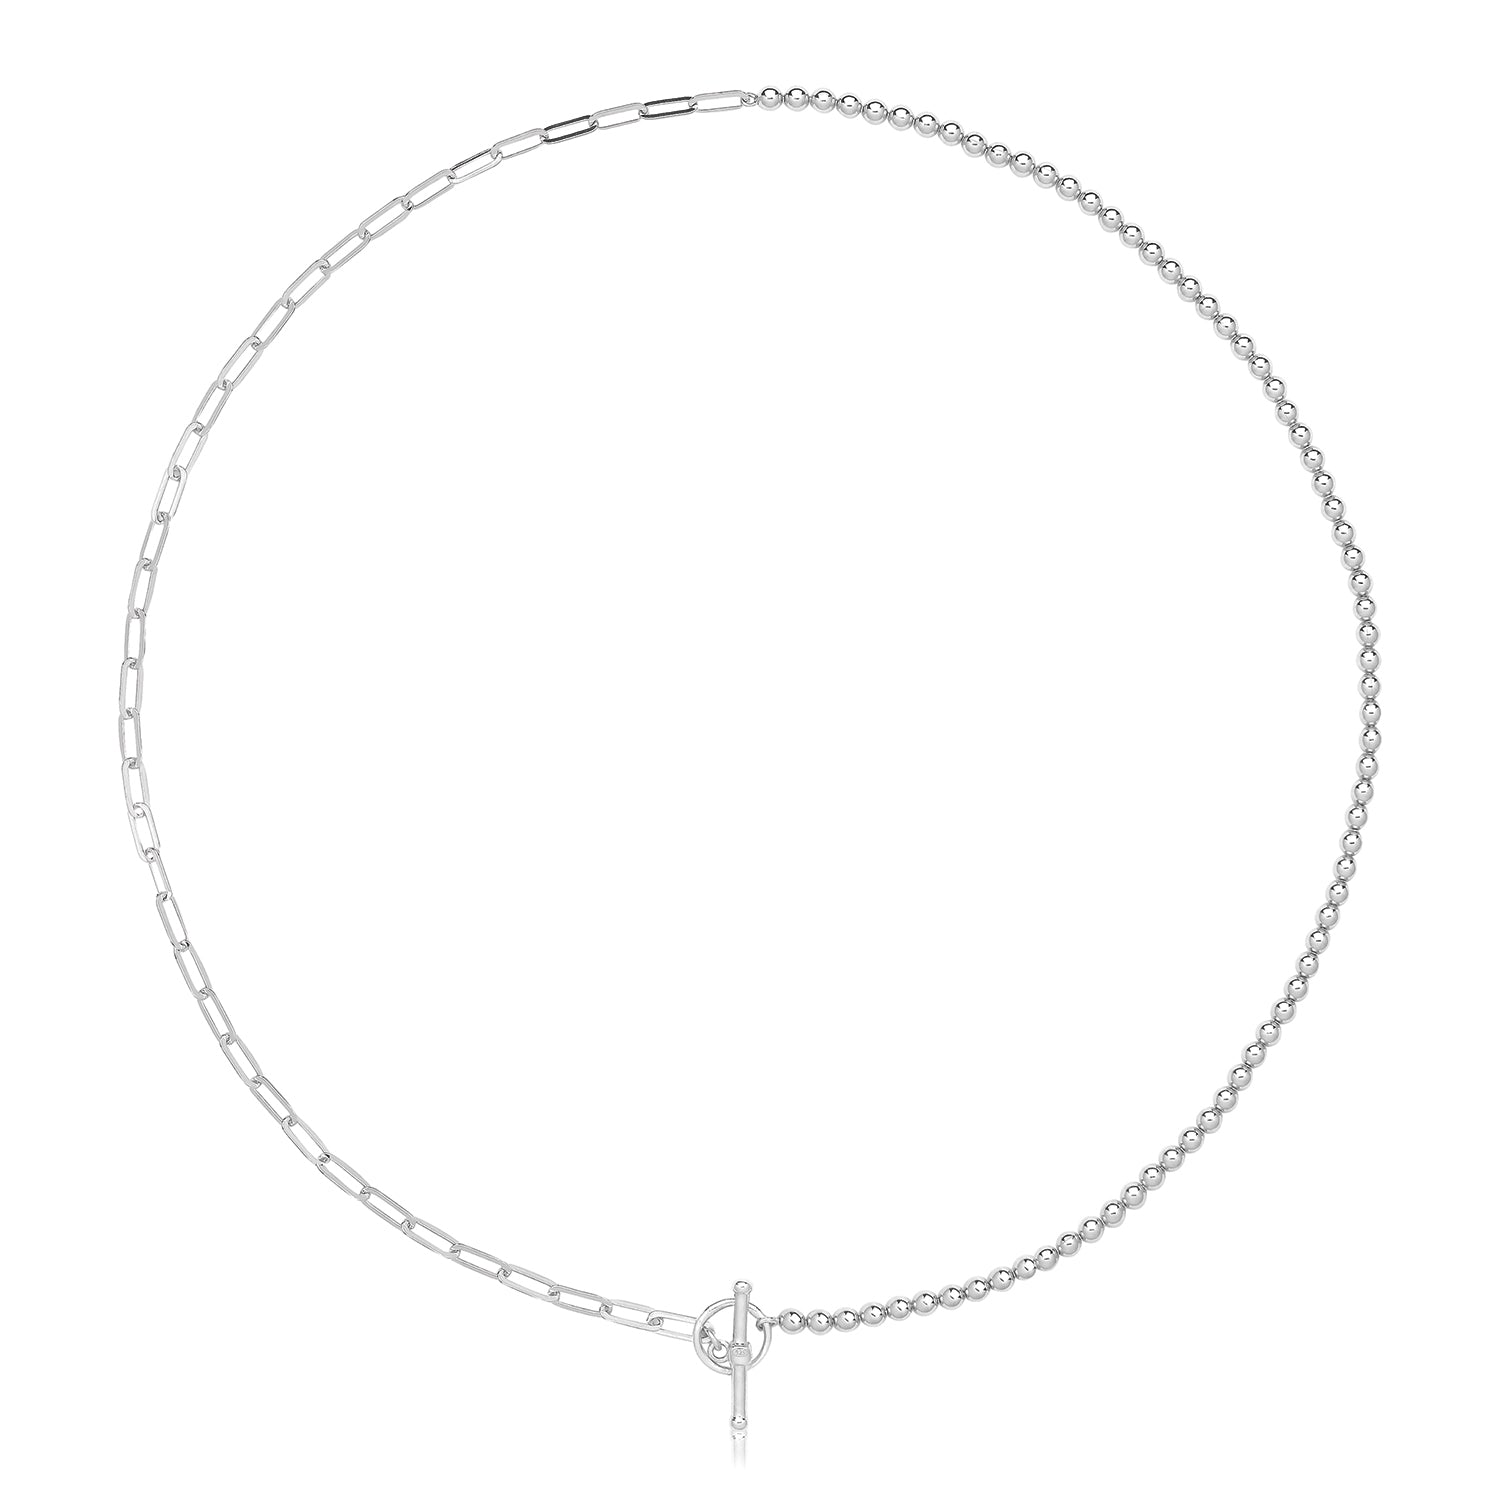 SILVER RHODIUM PLATED T-BAR NECKLET